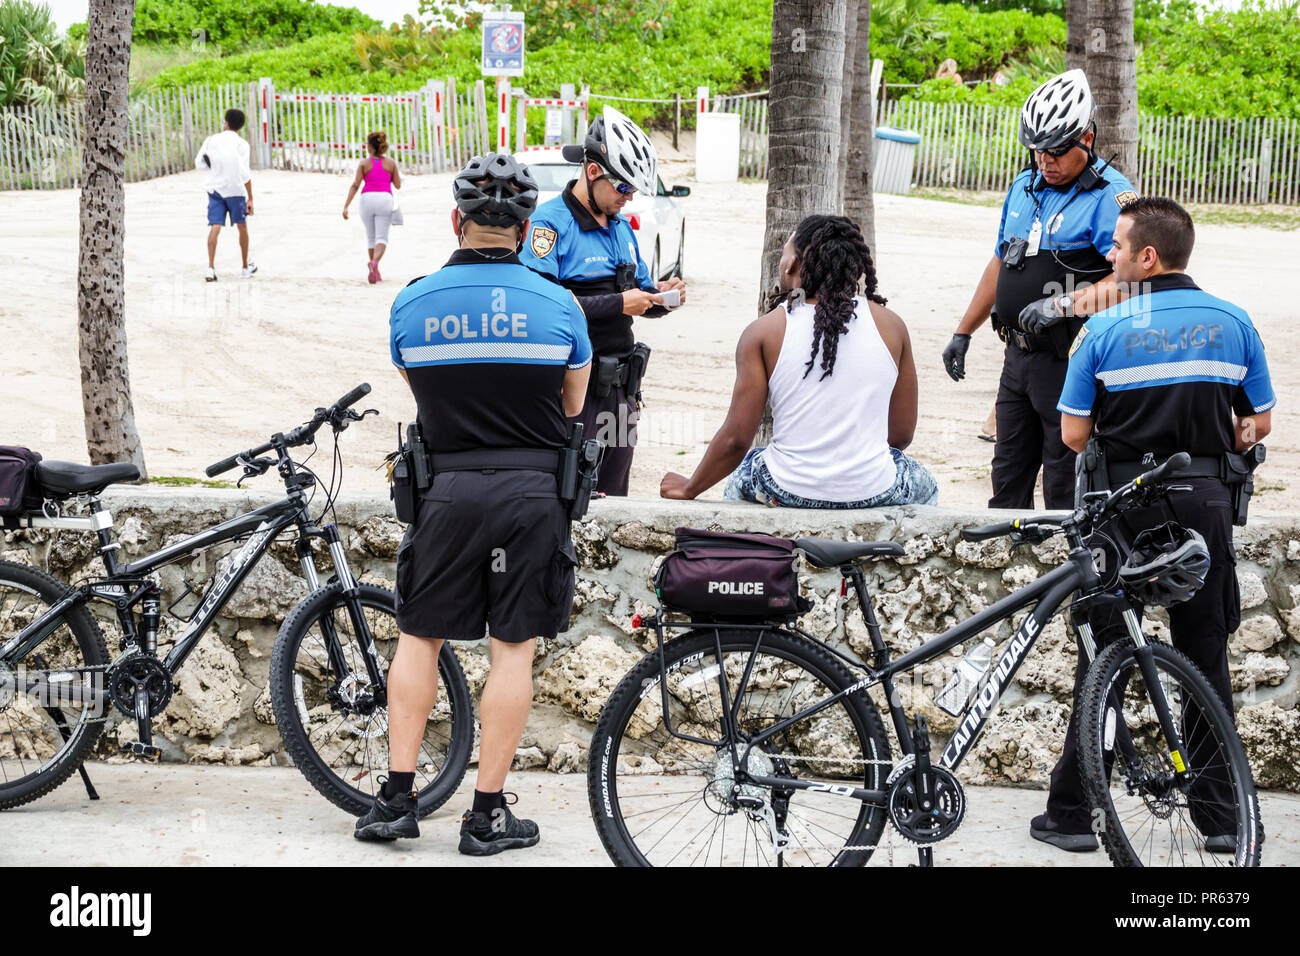 Miami Beach Florida,bicycle bicycles bicycling riding biking rider riders bike bikes,police,officer officers,questioning,Black man men male,FL18052720 Stock Photo